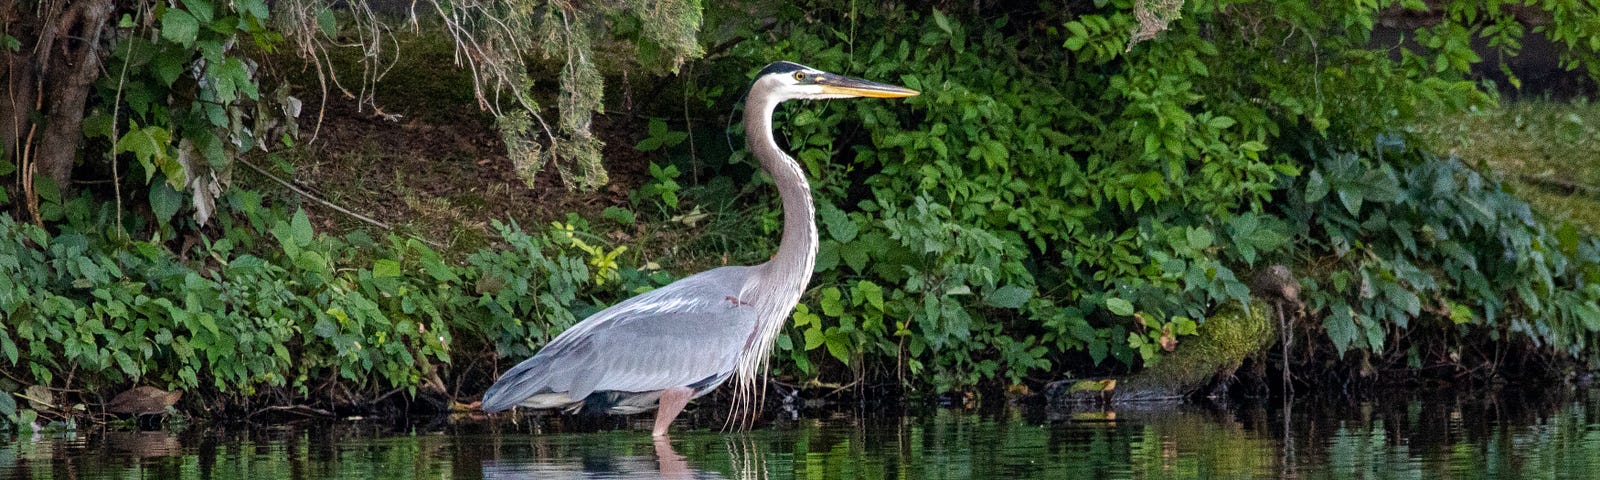 Great blue heron standing in pond surrounded by greenery